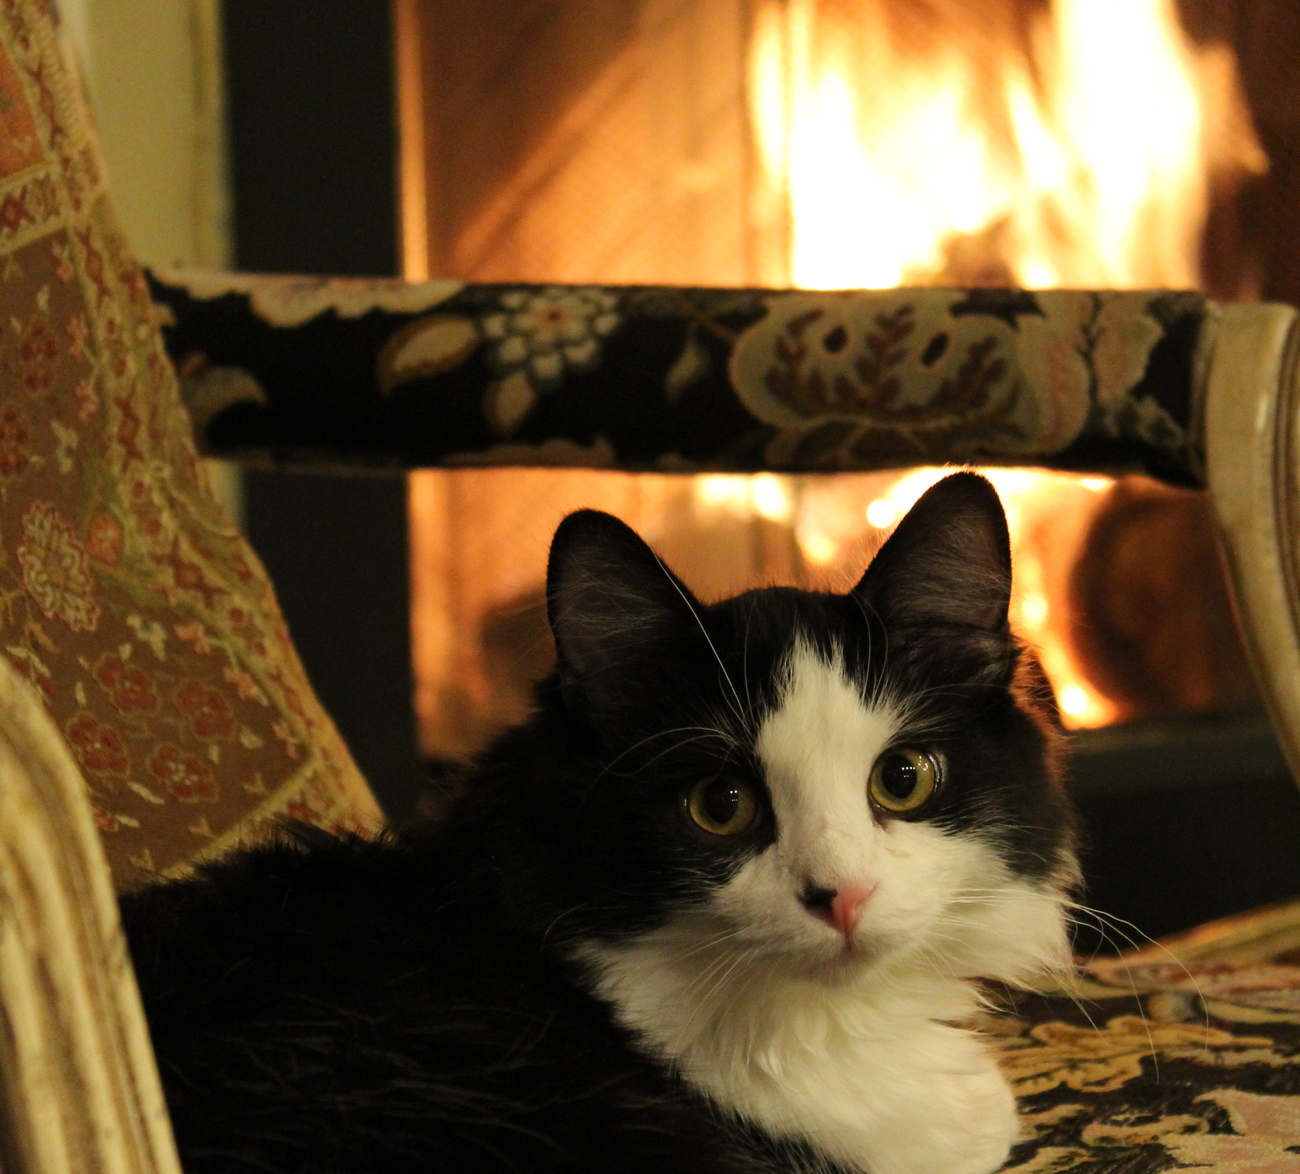 A cat laying on a chair with an open fire in a fireplace behind